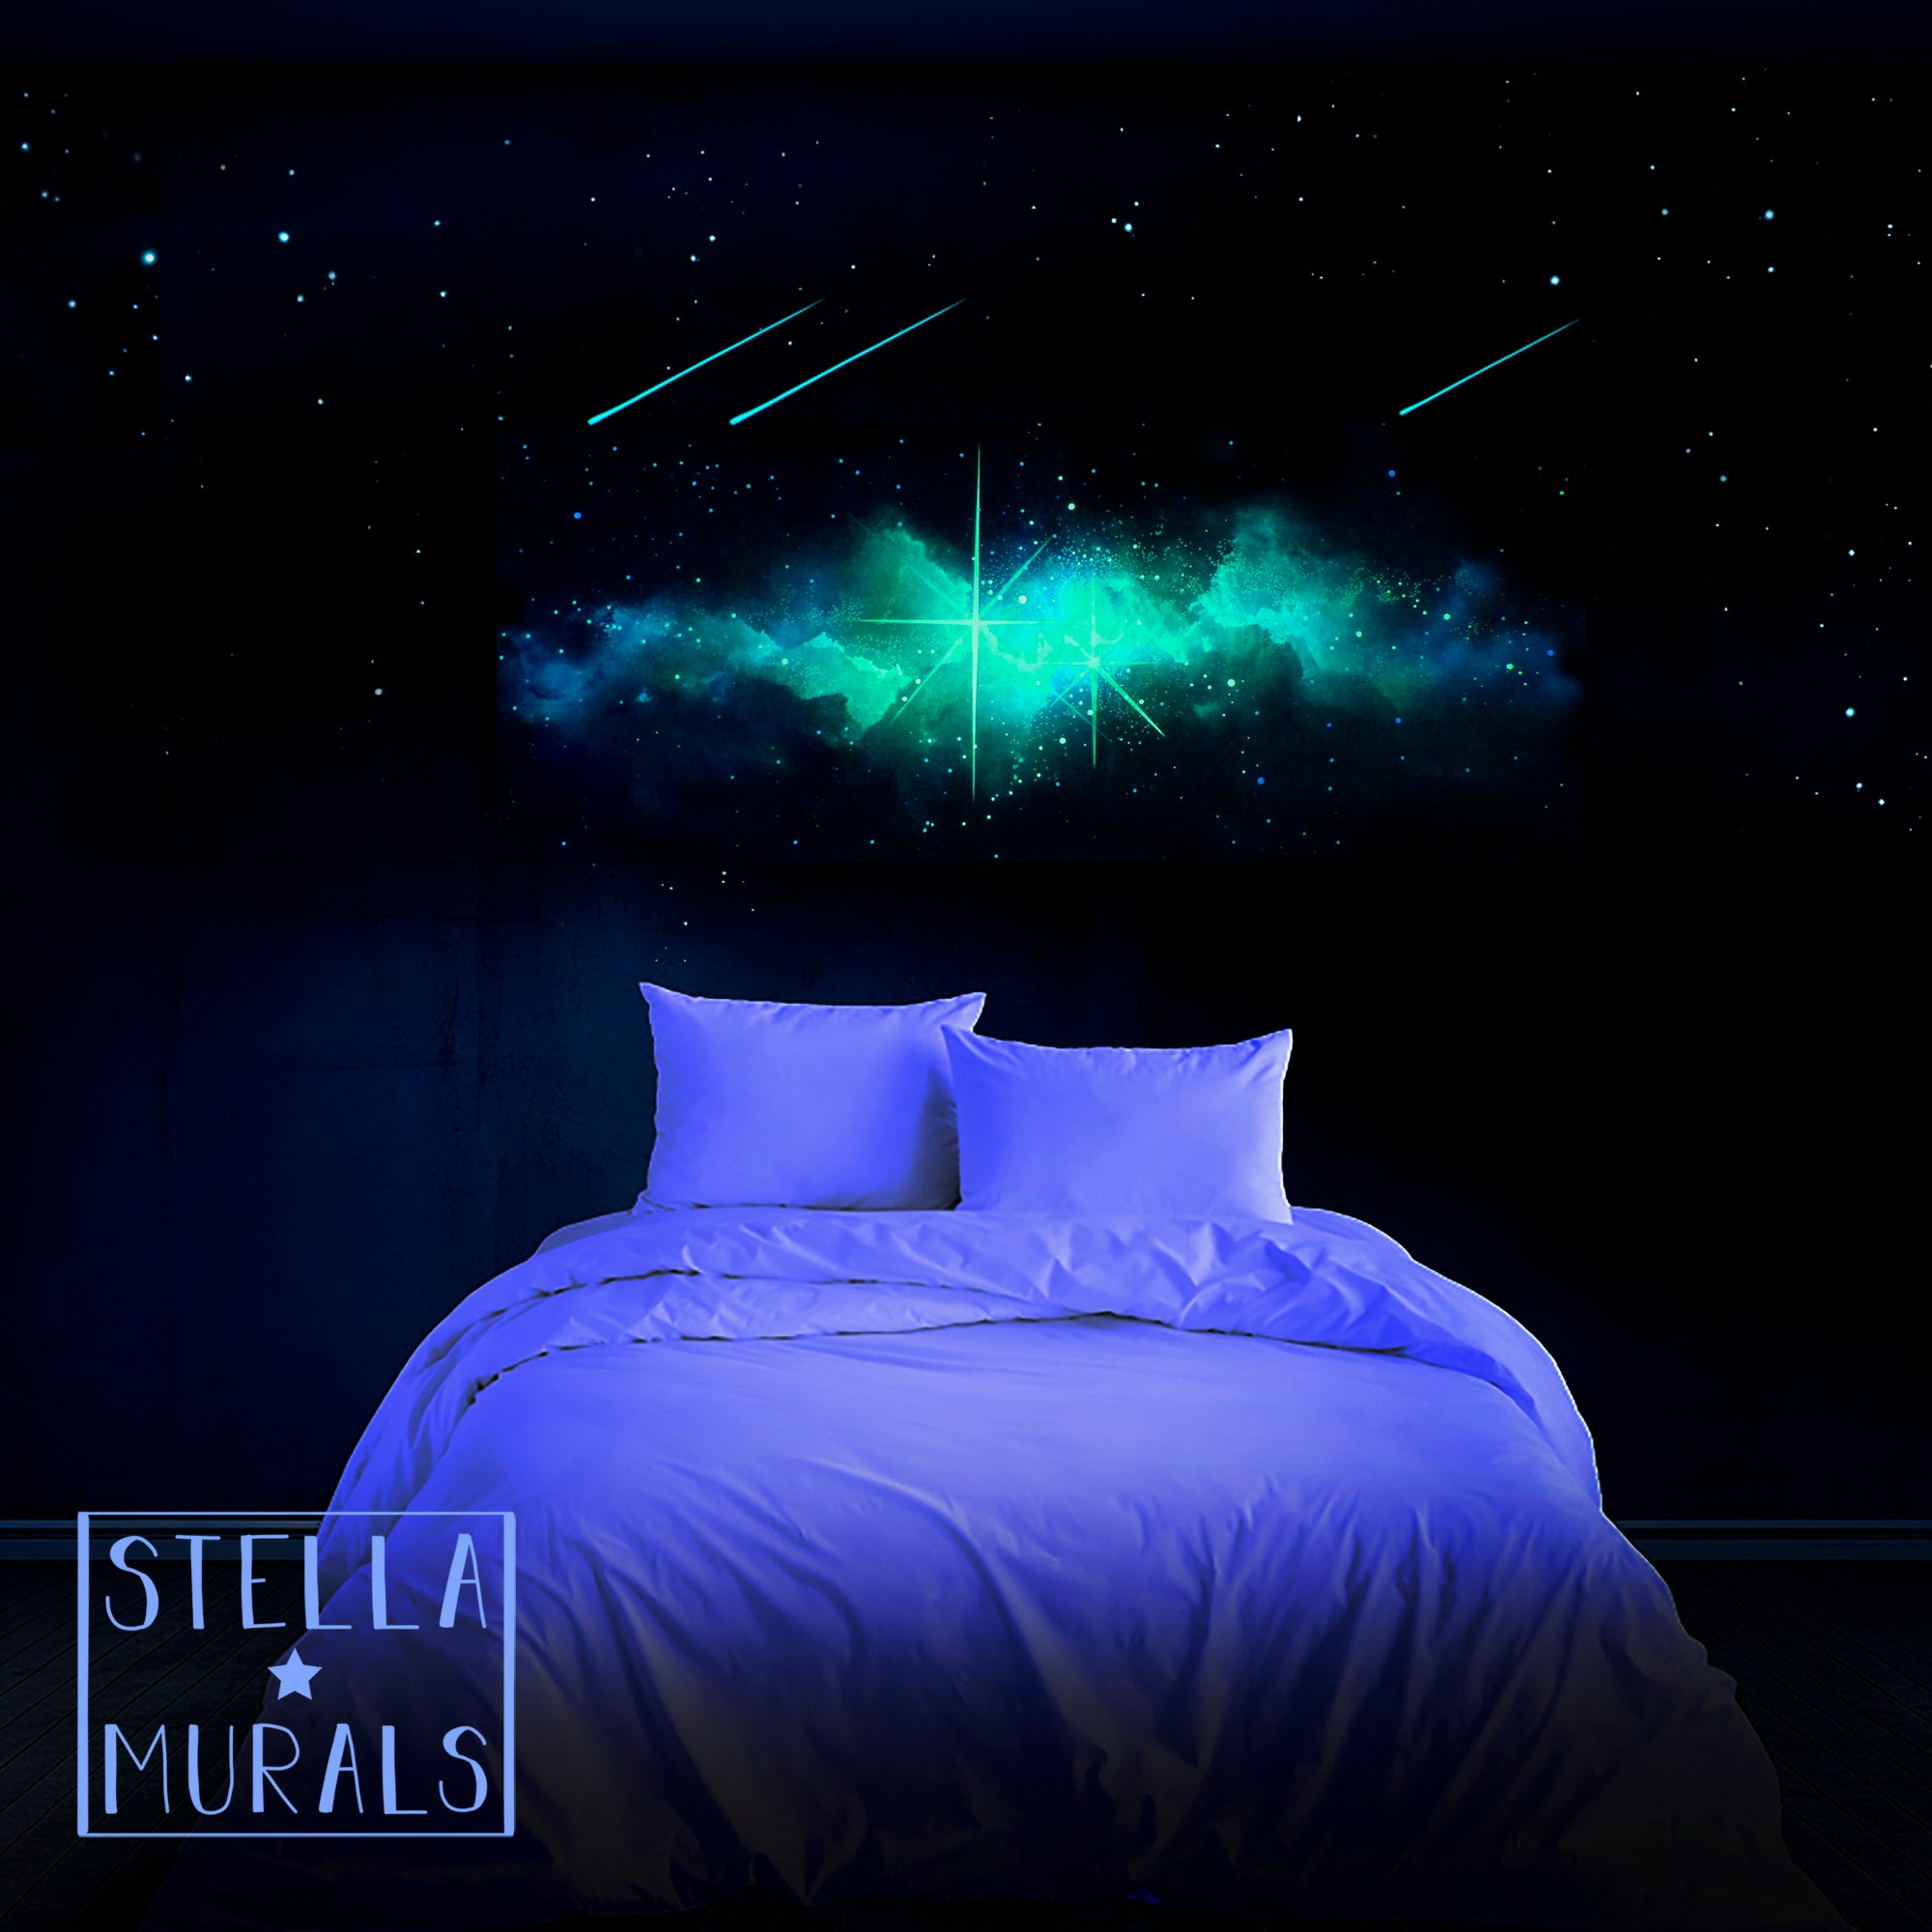 Glow in the dark nebula wall sticker that has a milky way appearance, glowing on a bedroom wall